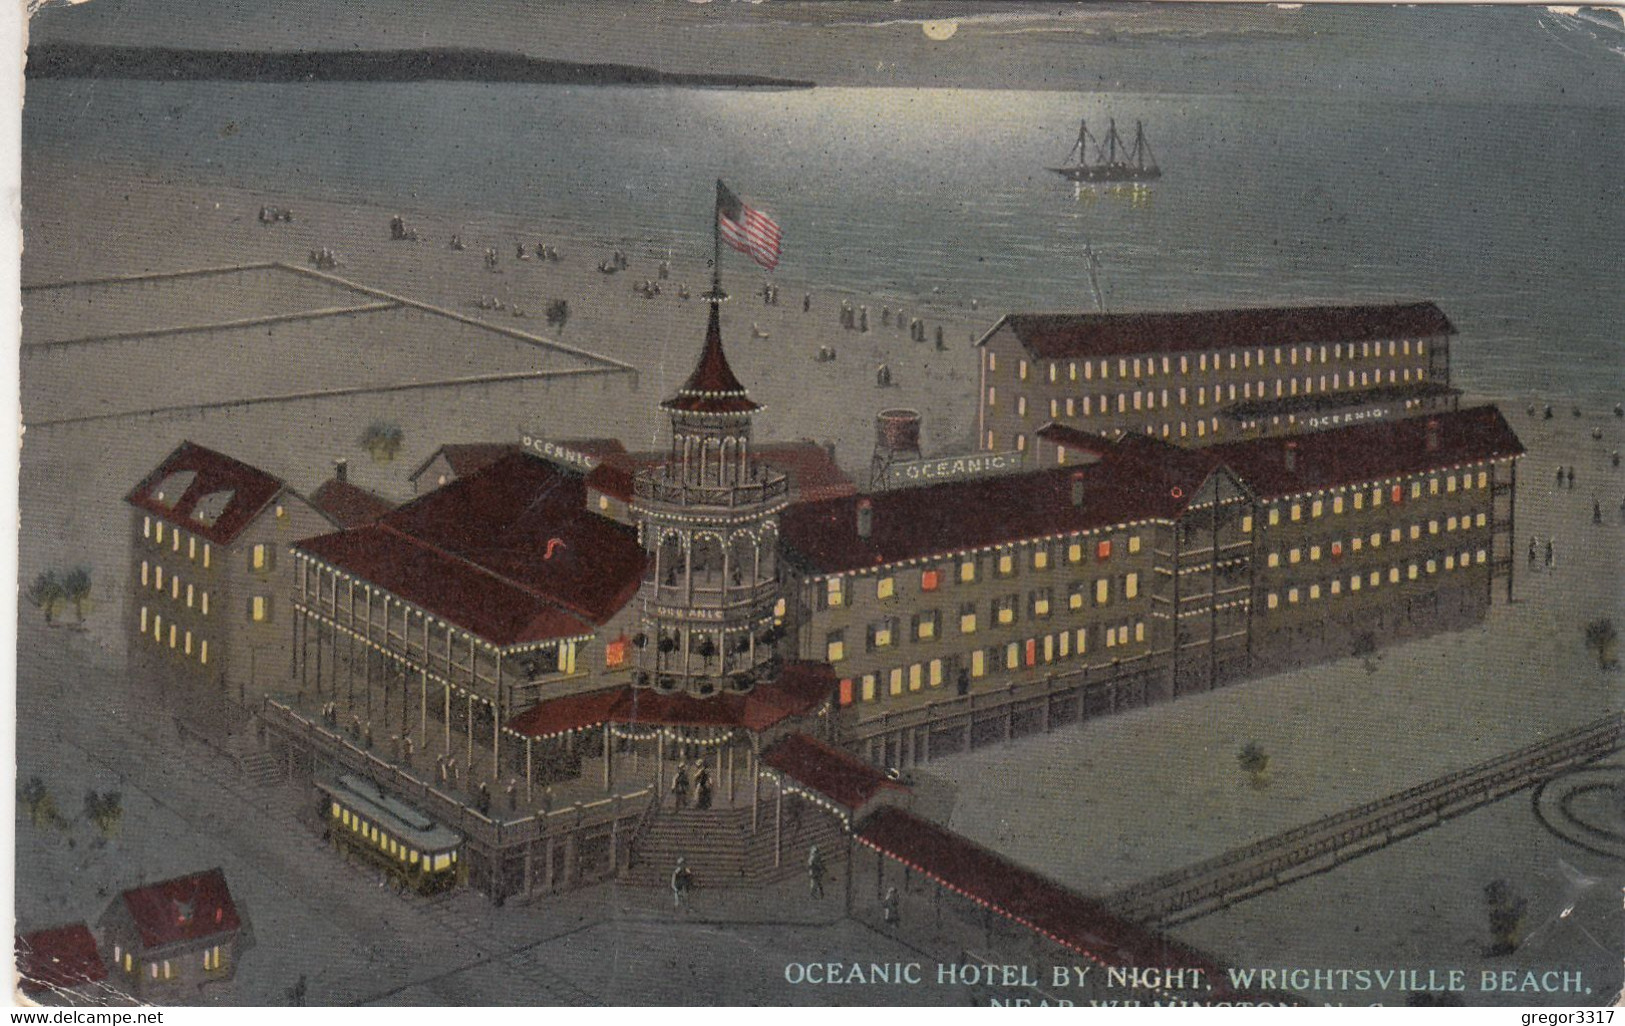 A5186) Oceanic Hotel By Night - WRIGHTSVILLE BEACH - Near WILMINGTON N. C. - 1915 - Wilmington